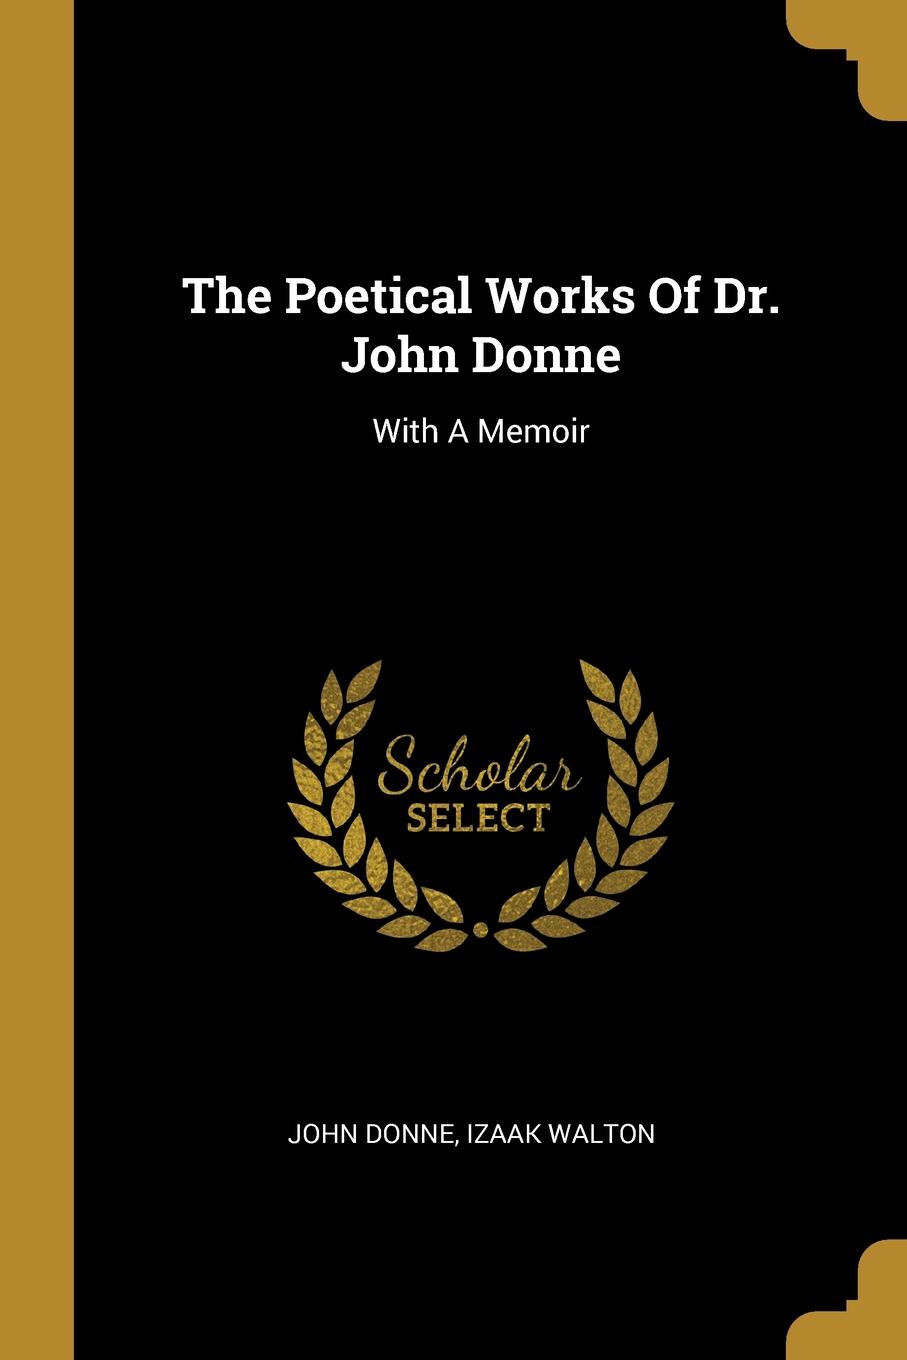 The Poetical Works Of Dr. John Donne. With A Memoir